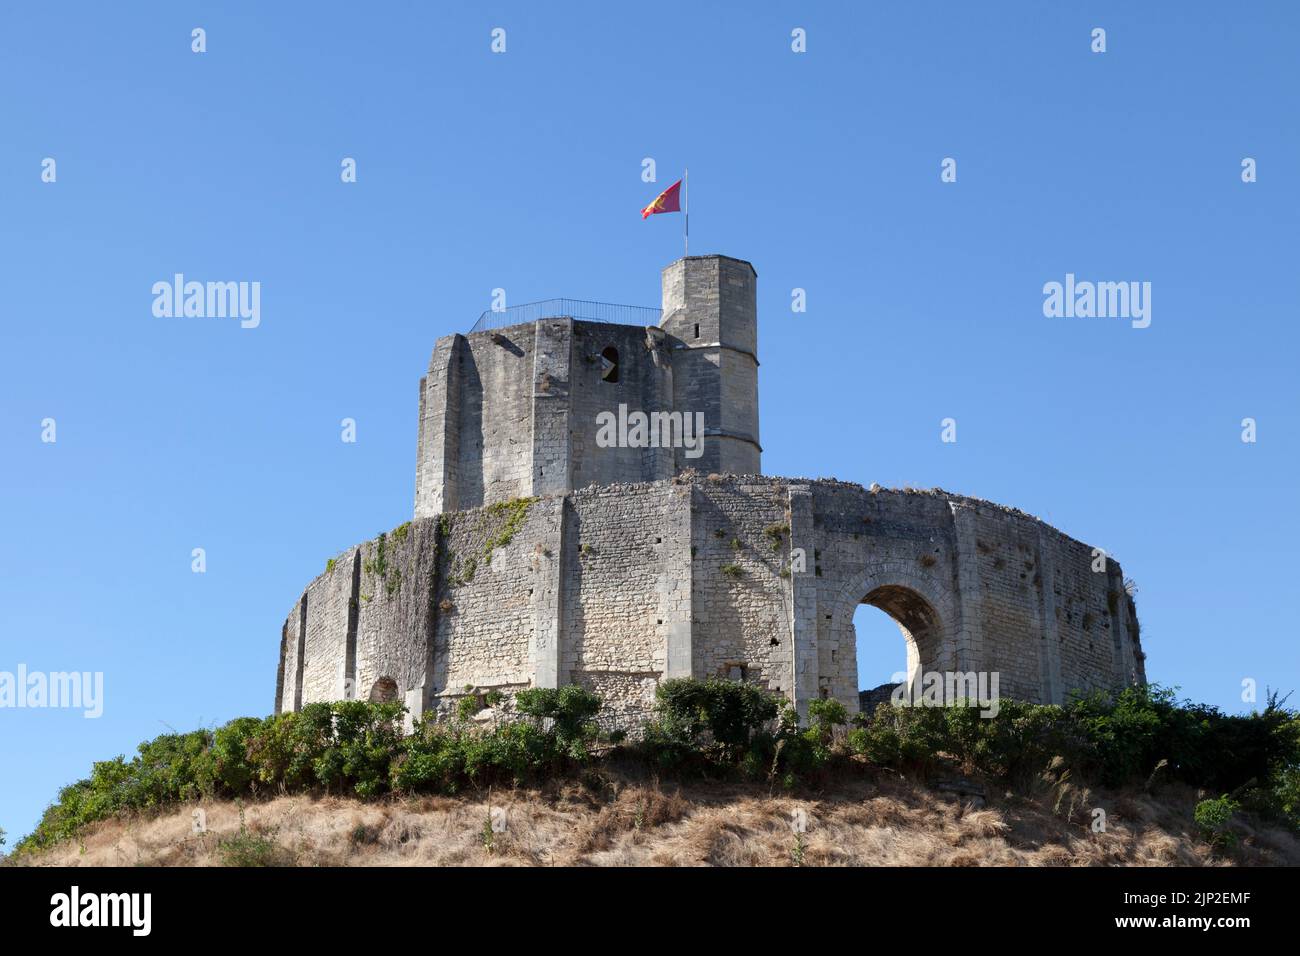 Ruins of the keep of the castle of Gisors, a former fortified castle, built between the end of the eleventh century and the sixteenth century. Stock Photo